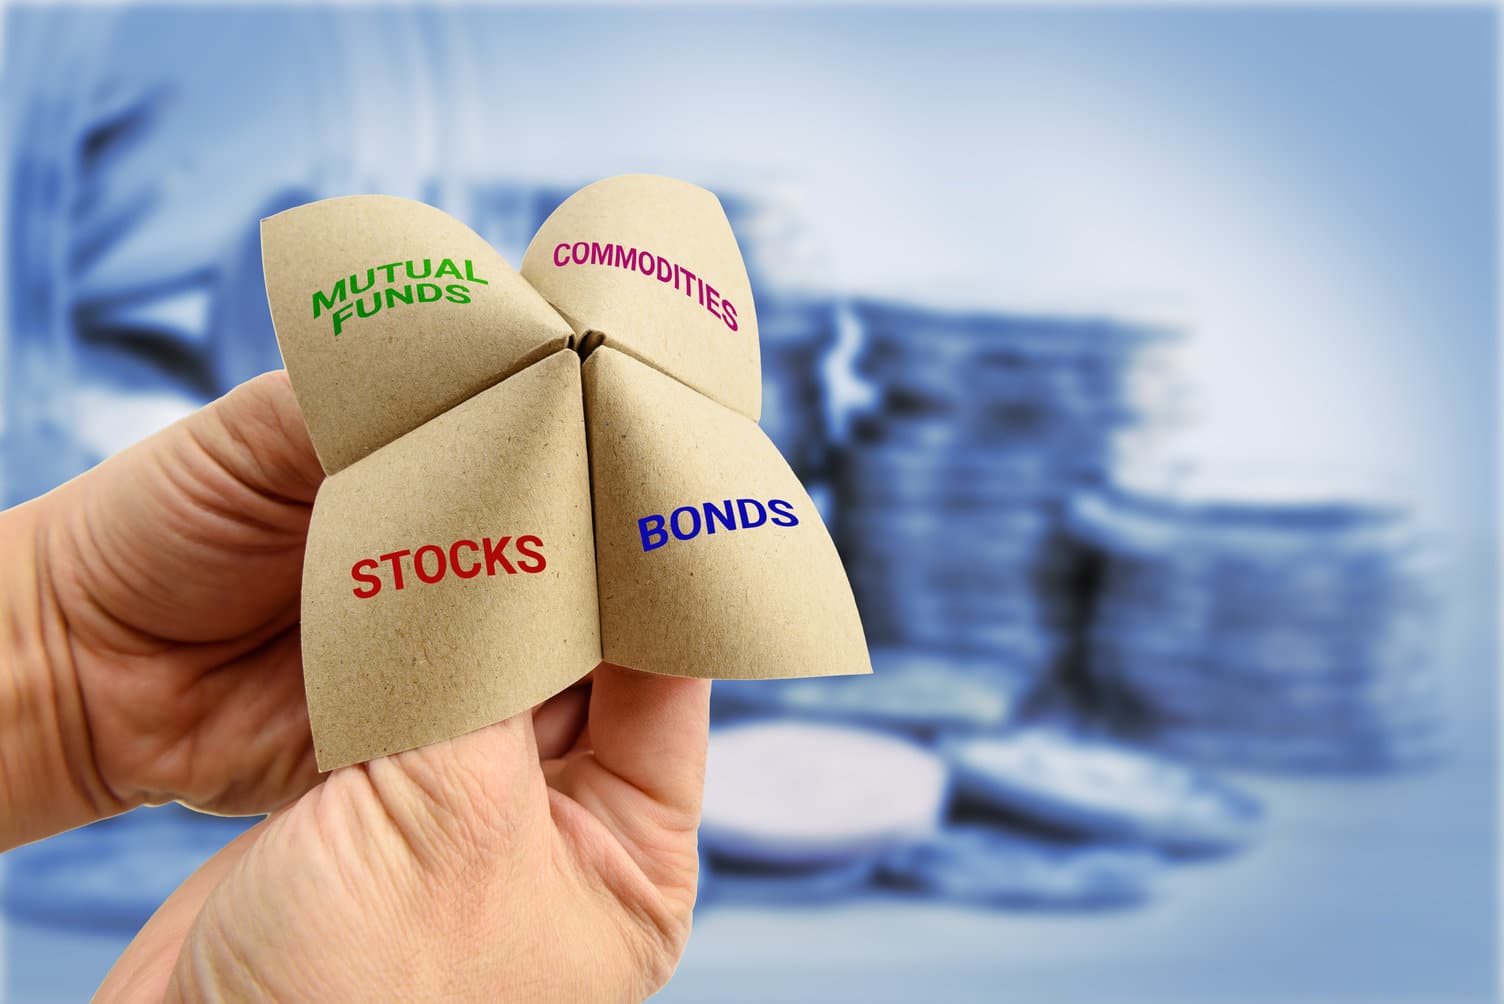 Stock market beginners should reduce risk by spreading their investments